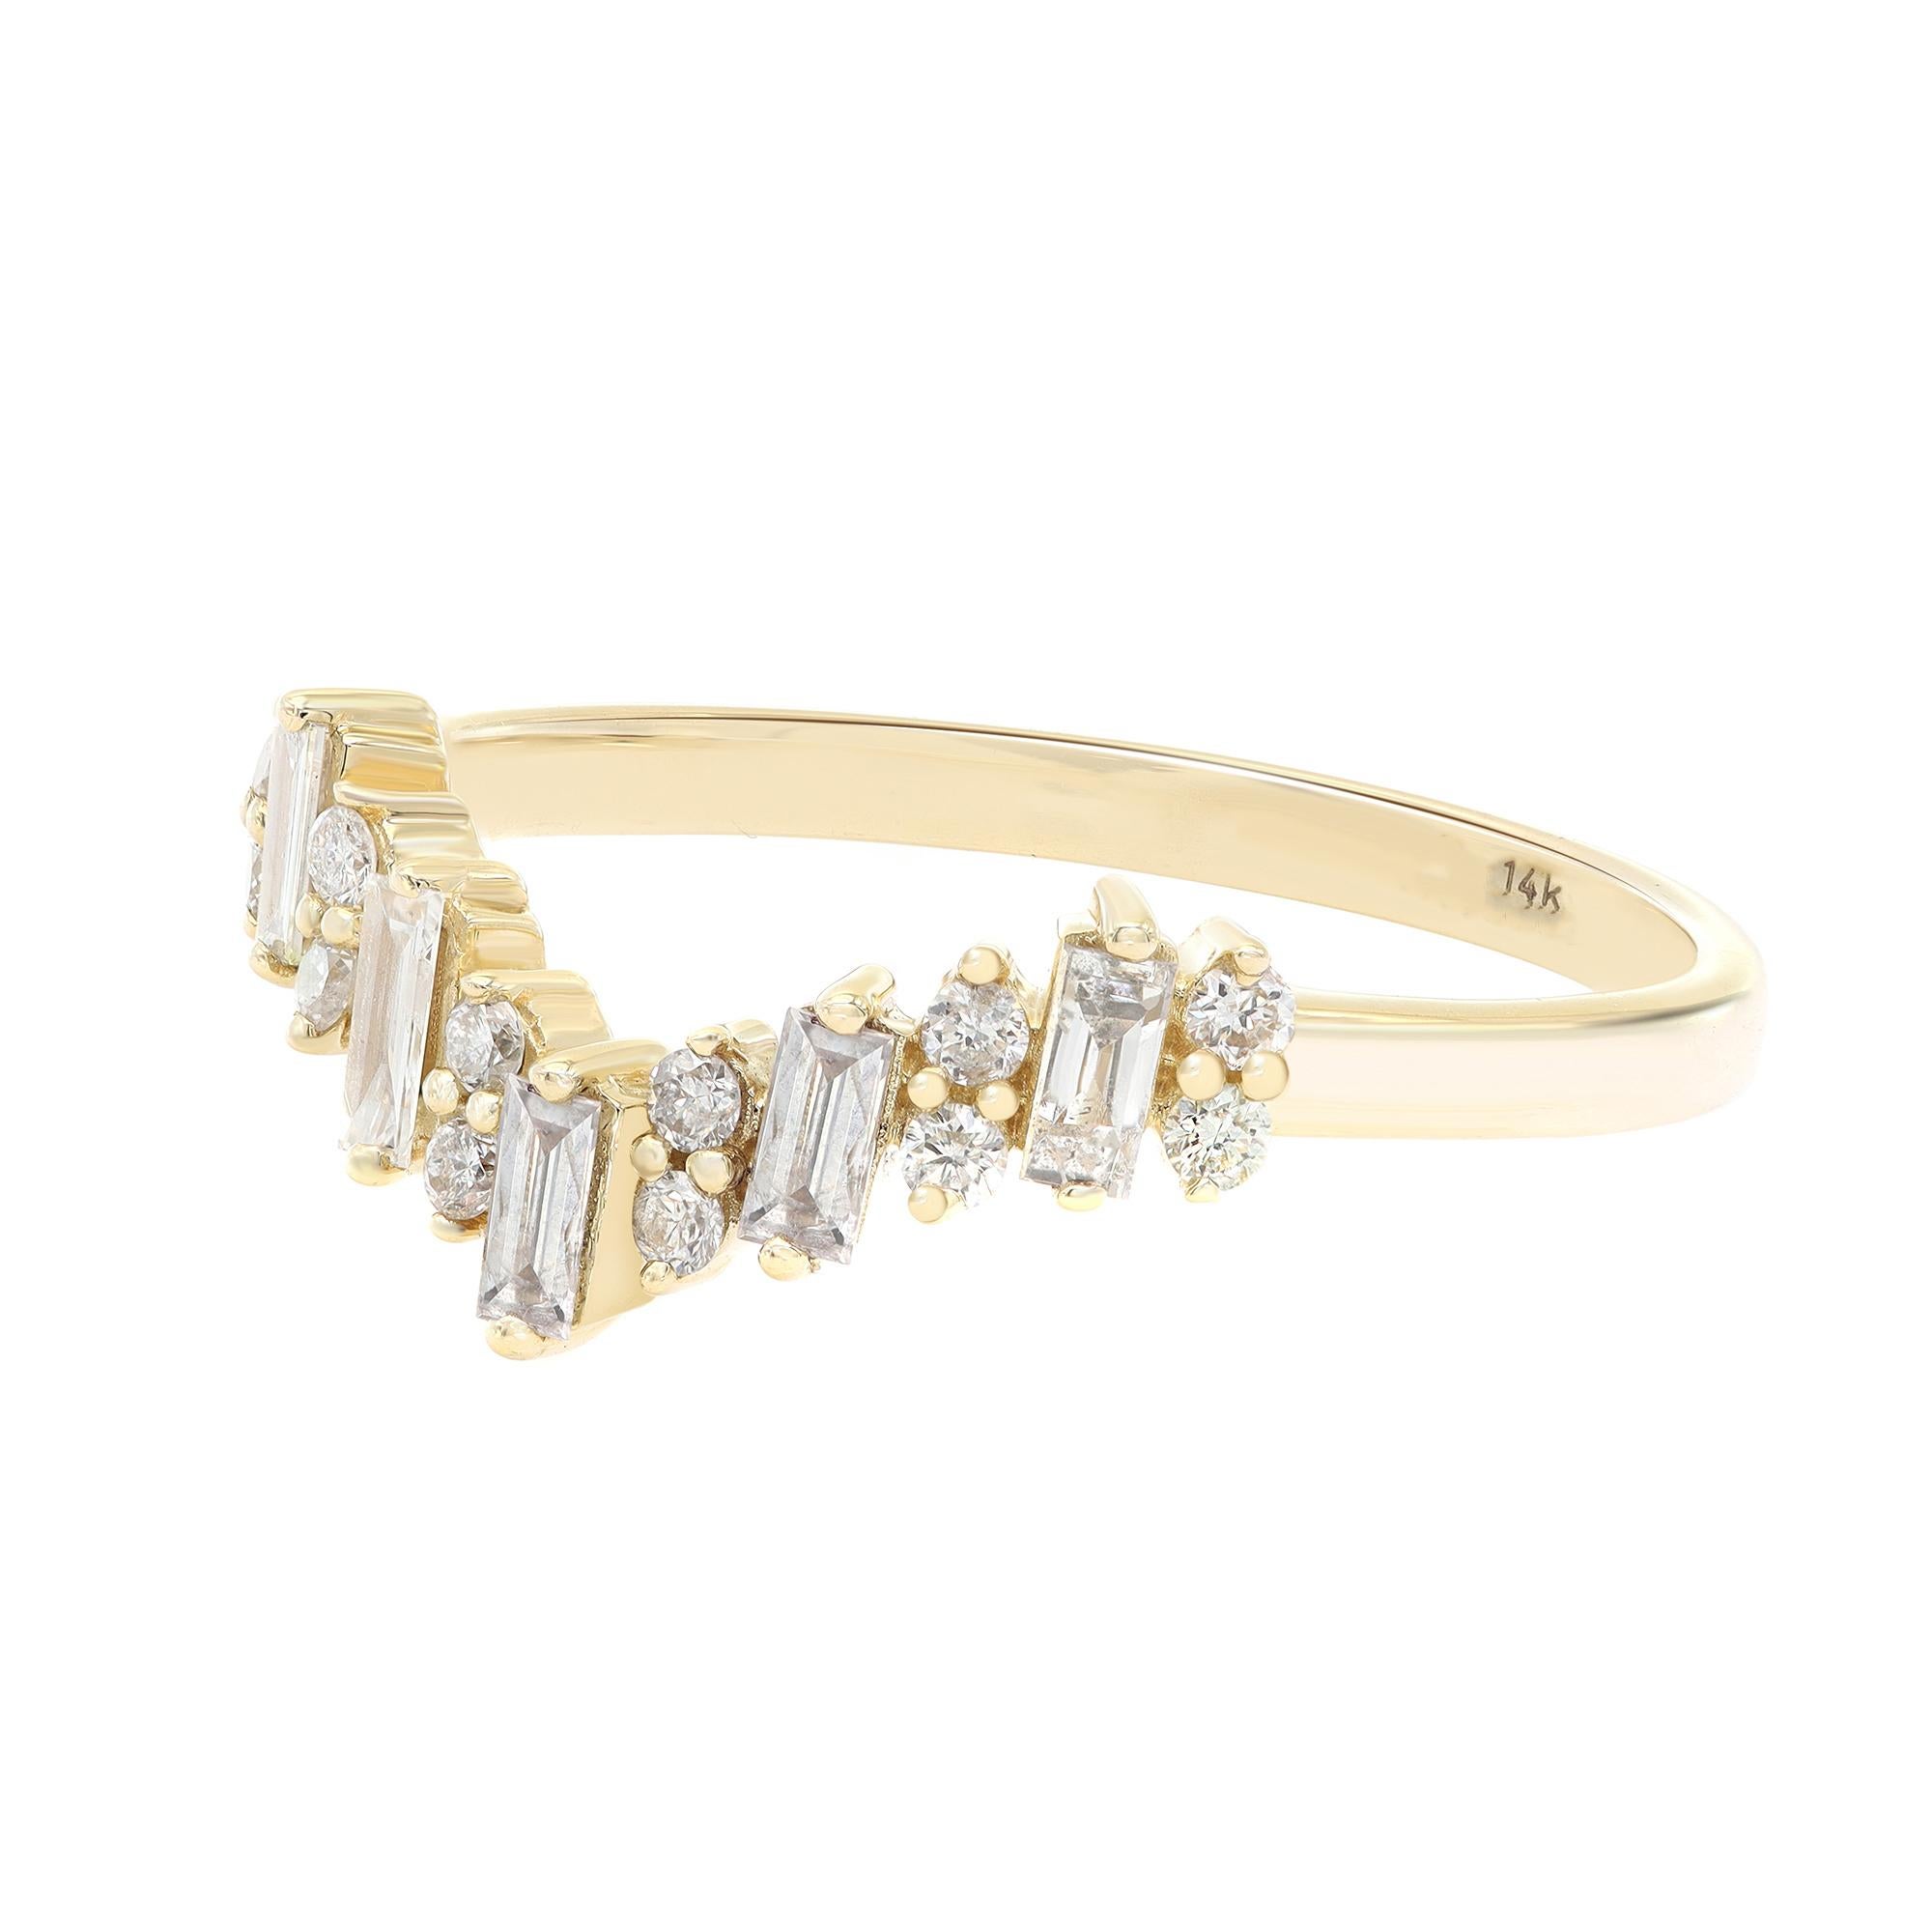 This beautiful and delicate diamond V shaped ring is a perfect fit for any occasion. Crafted in 14K yellow gold. Features 5 Baguette cut and 12 round cut diamonds in prong setting. The total diamond weight is 0.33cts. Diamond color G-H and Clarity